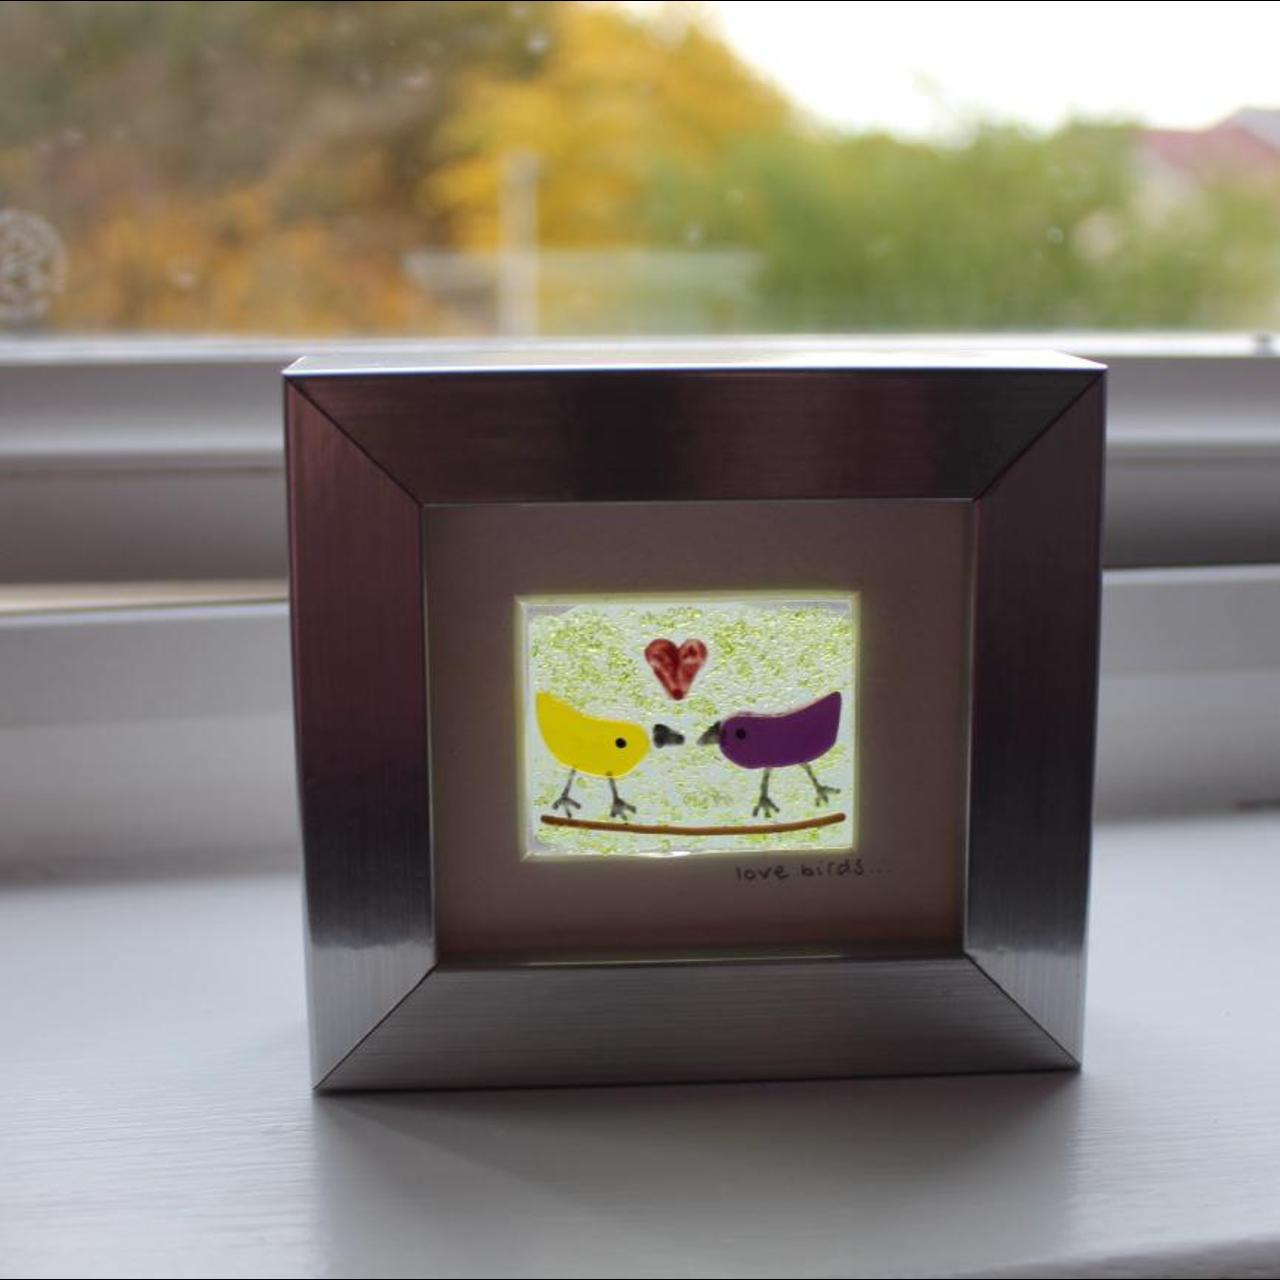 Product Image 3 - Small “Love Birds” stained glass